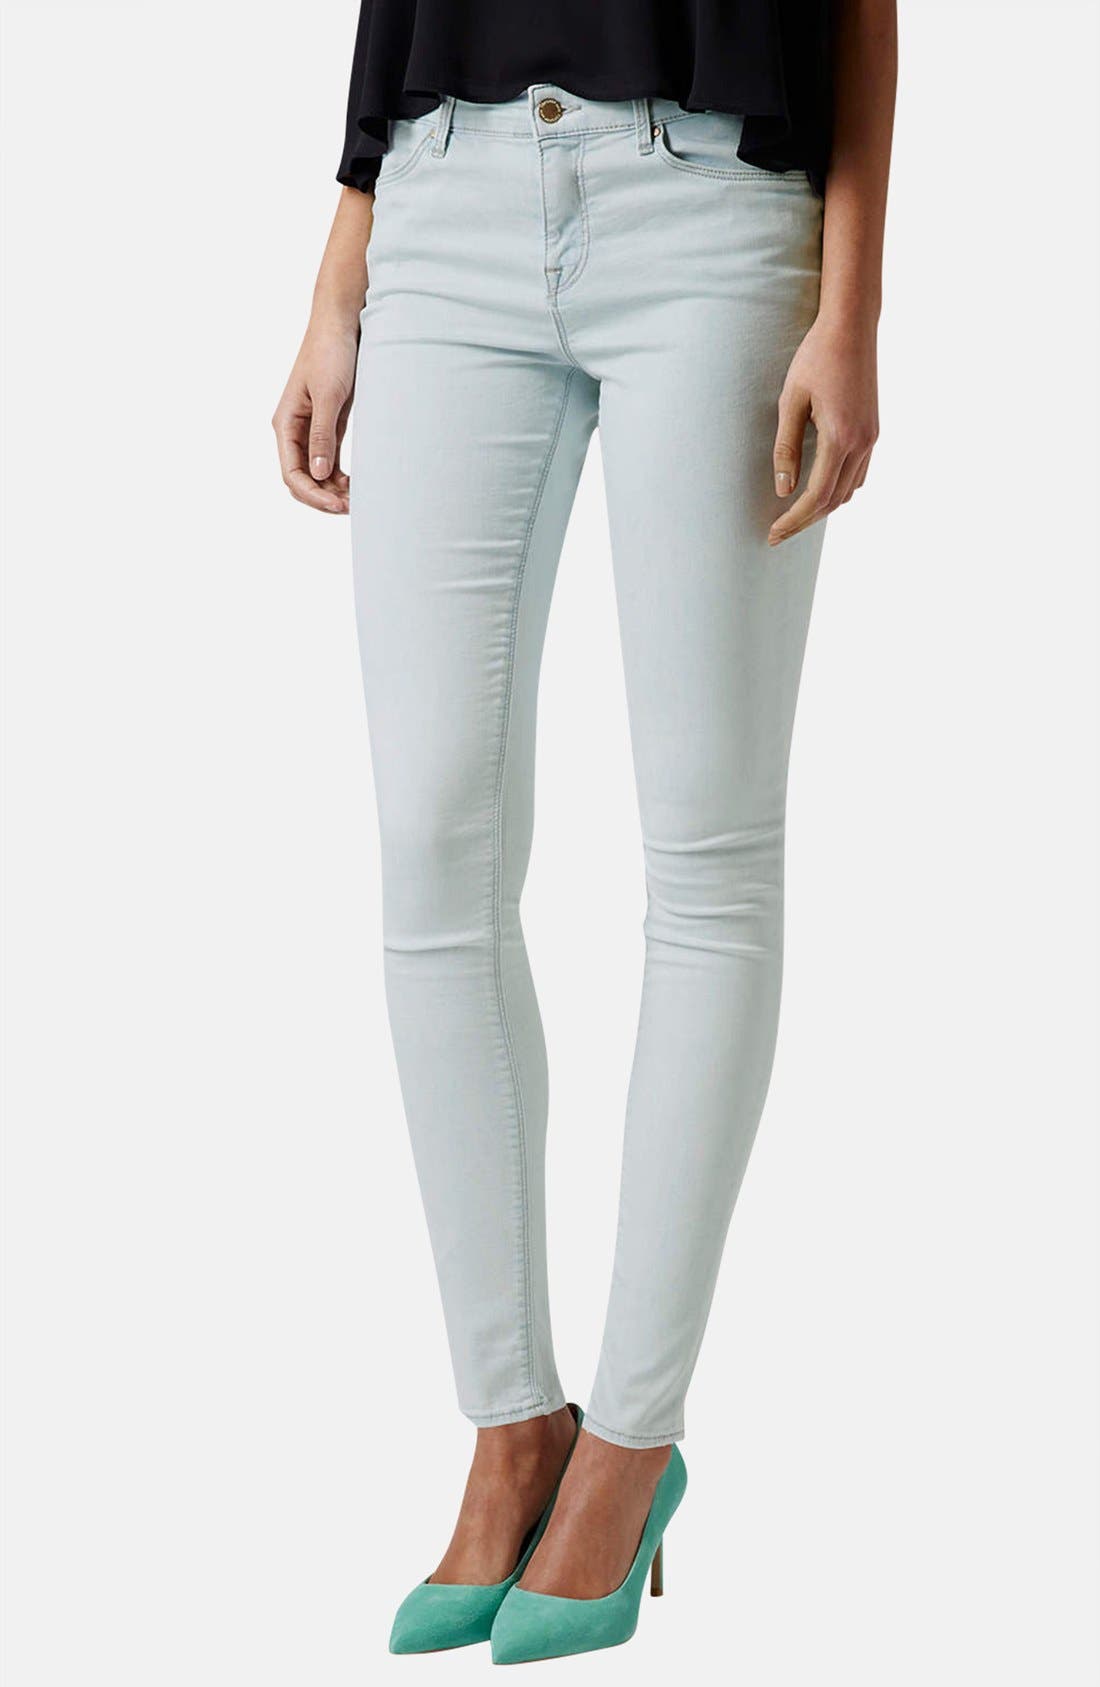 topshop mid rise skinny jeans